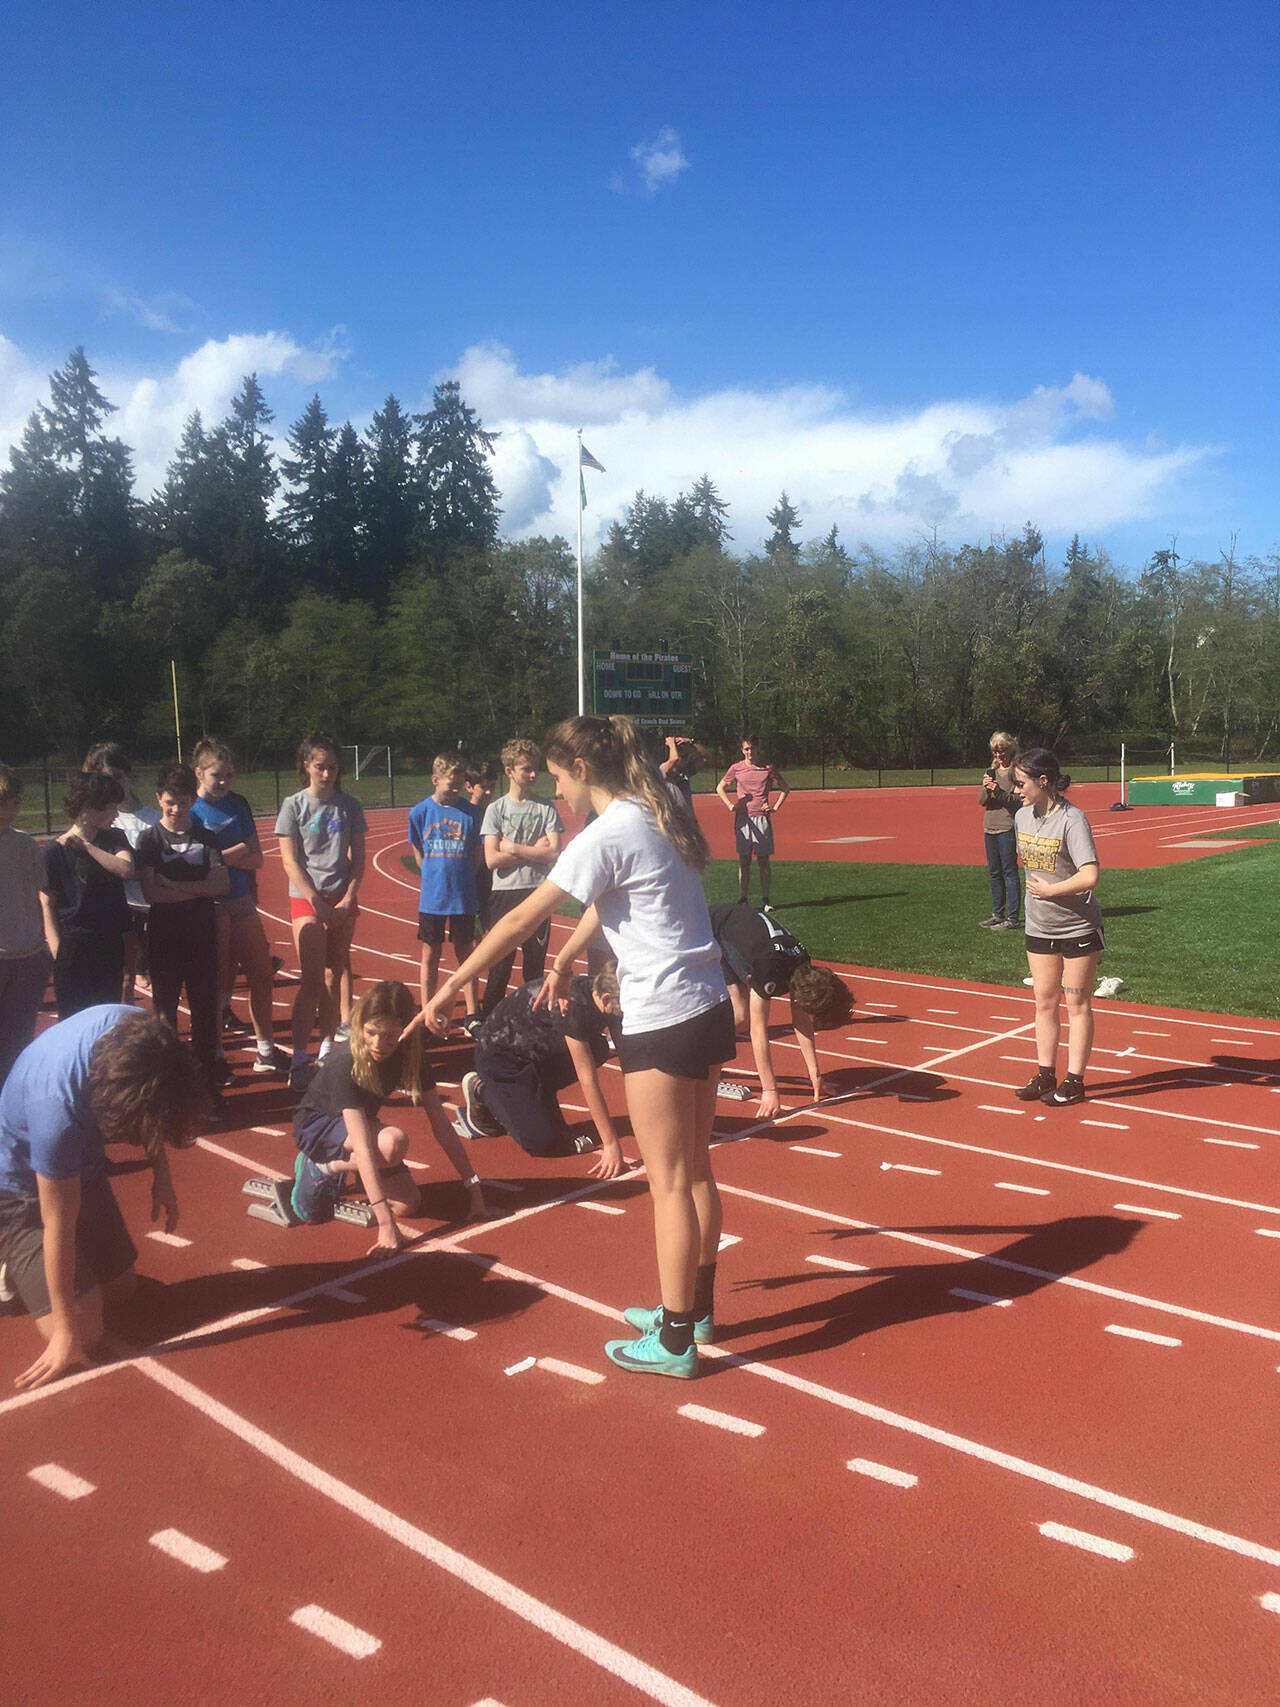 (Courtesy Photo) Senior team captains, Nicki Becker (left) and Phoebe Wilke (right) are mentoring the McMurray Mustang track team and instructing them on how to use starting blocks.